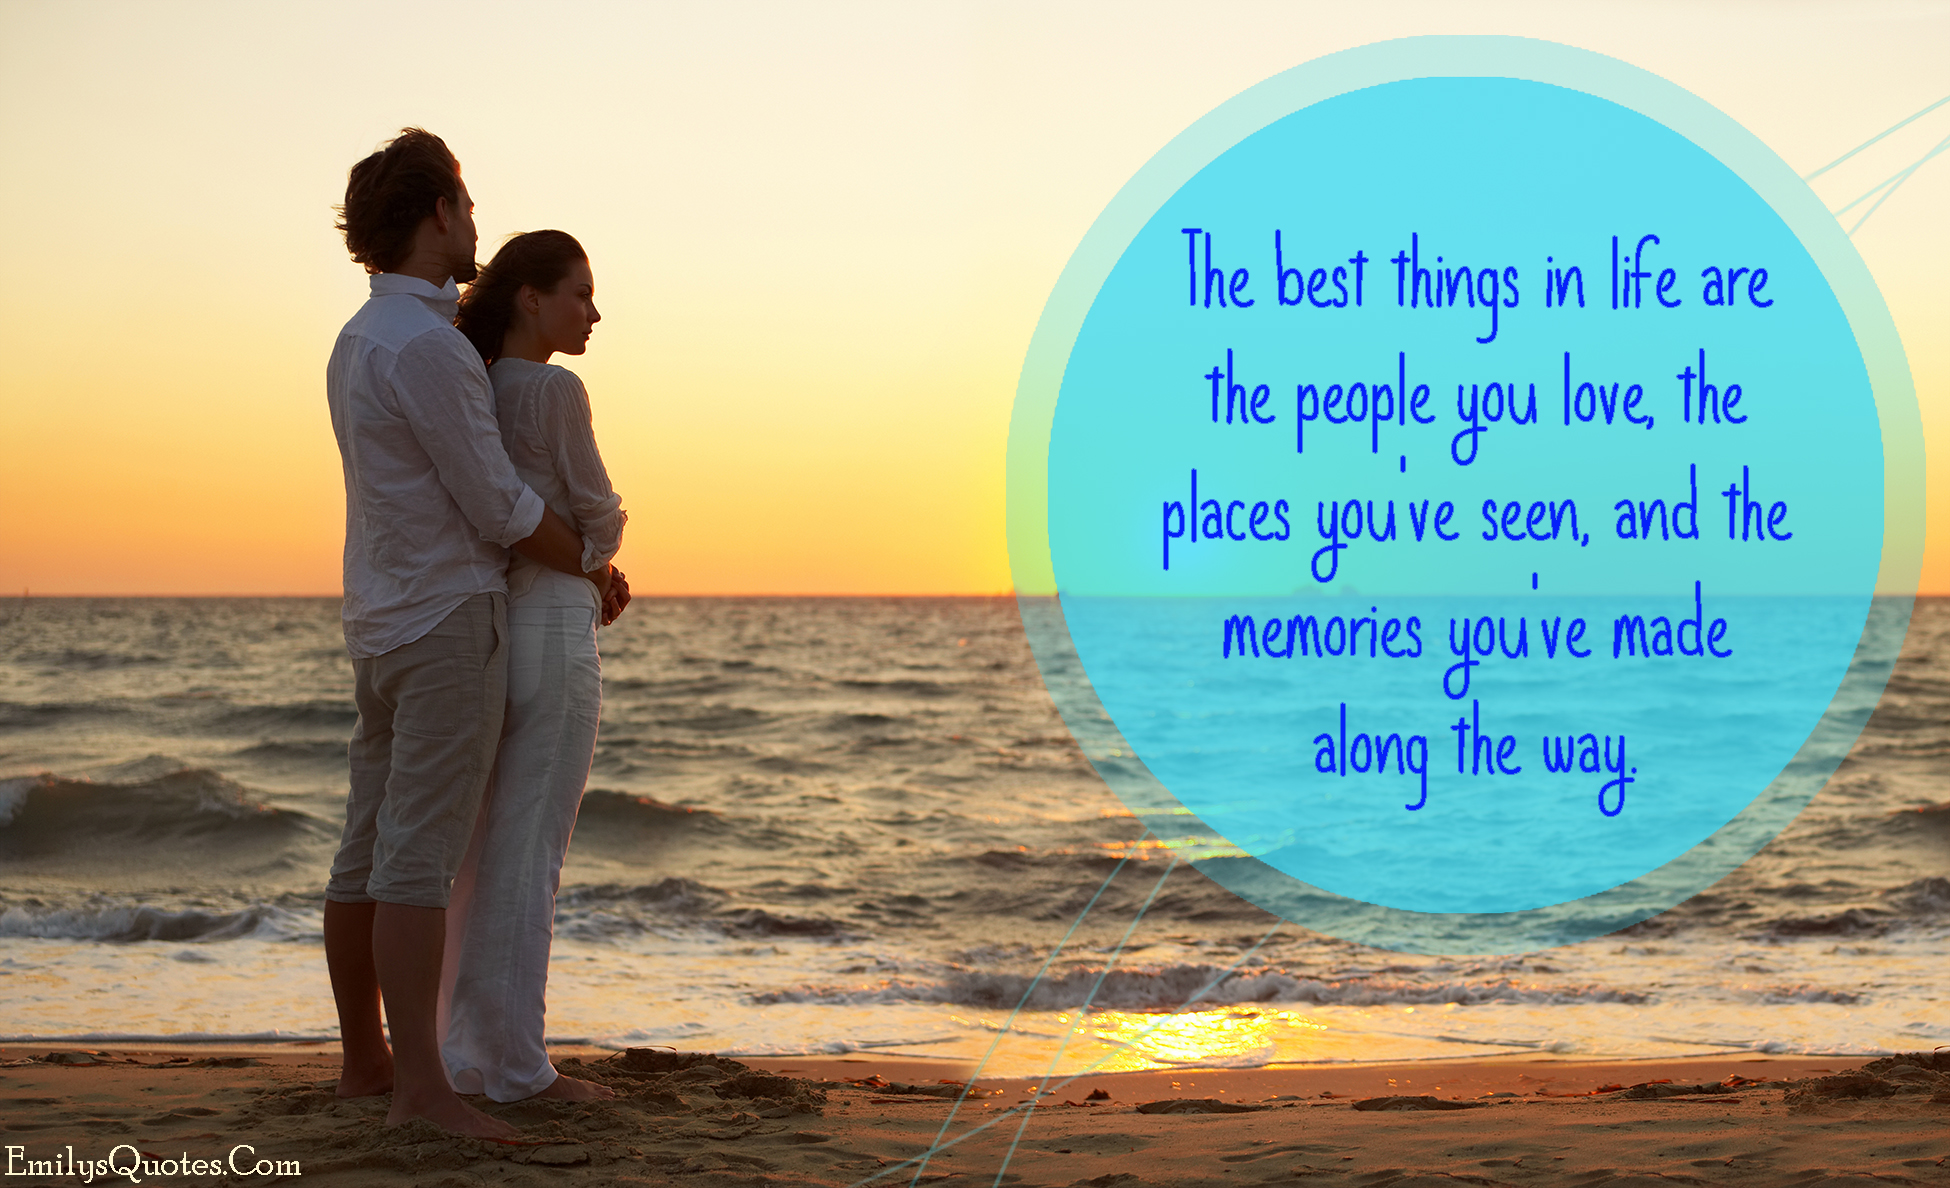 The best thing you can. Love is the best thing in Life.. The best things in Life. The Memory of Love. The best thing.